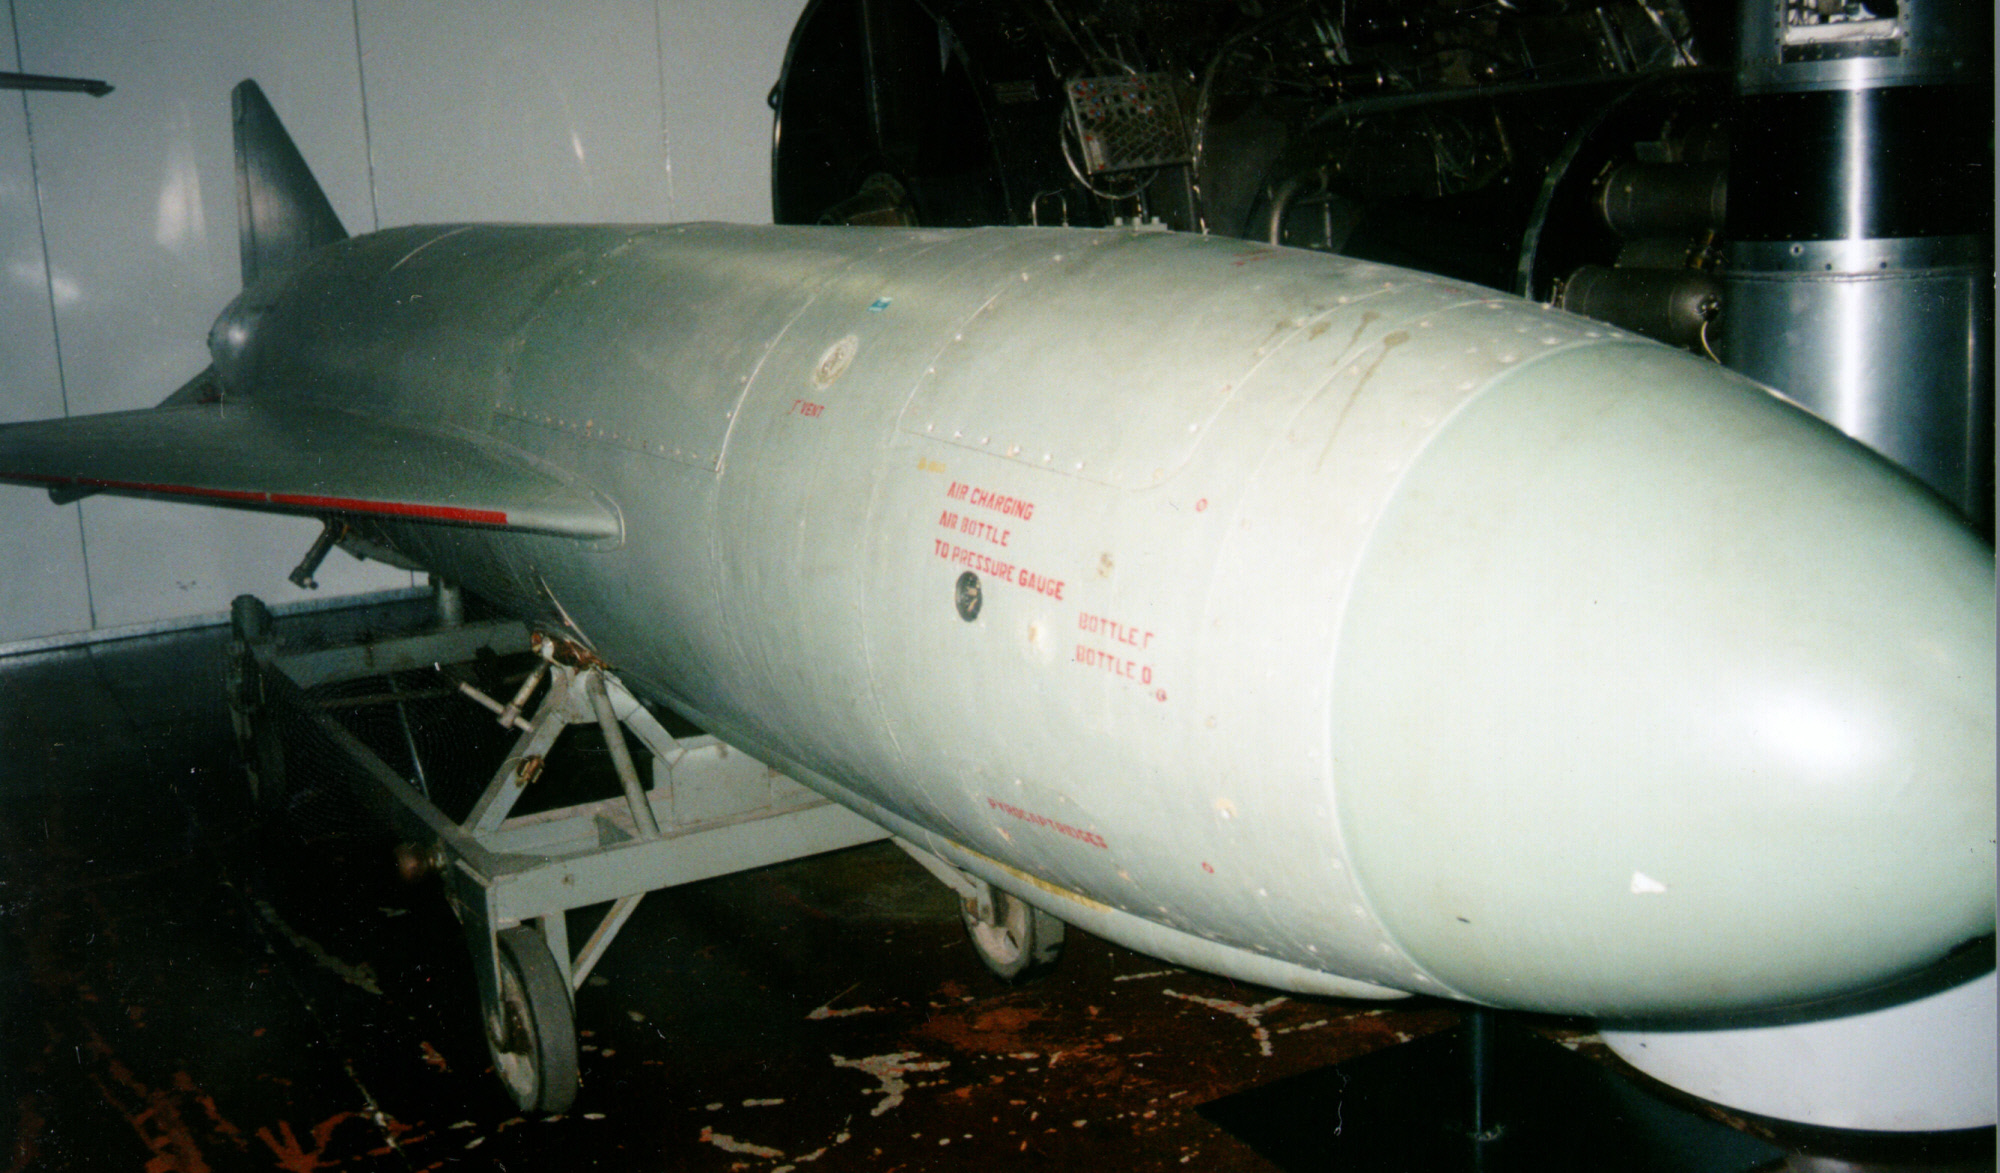 SS-N-2 Styx anti-ship missile. Photo credit: Smithsonian's National Air and Space Museum